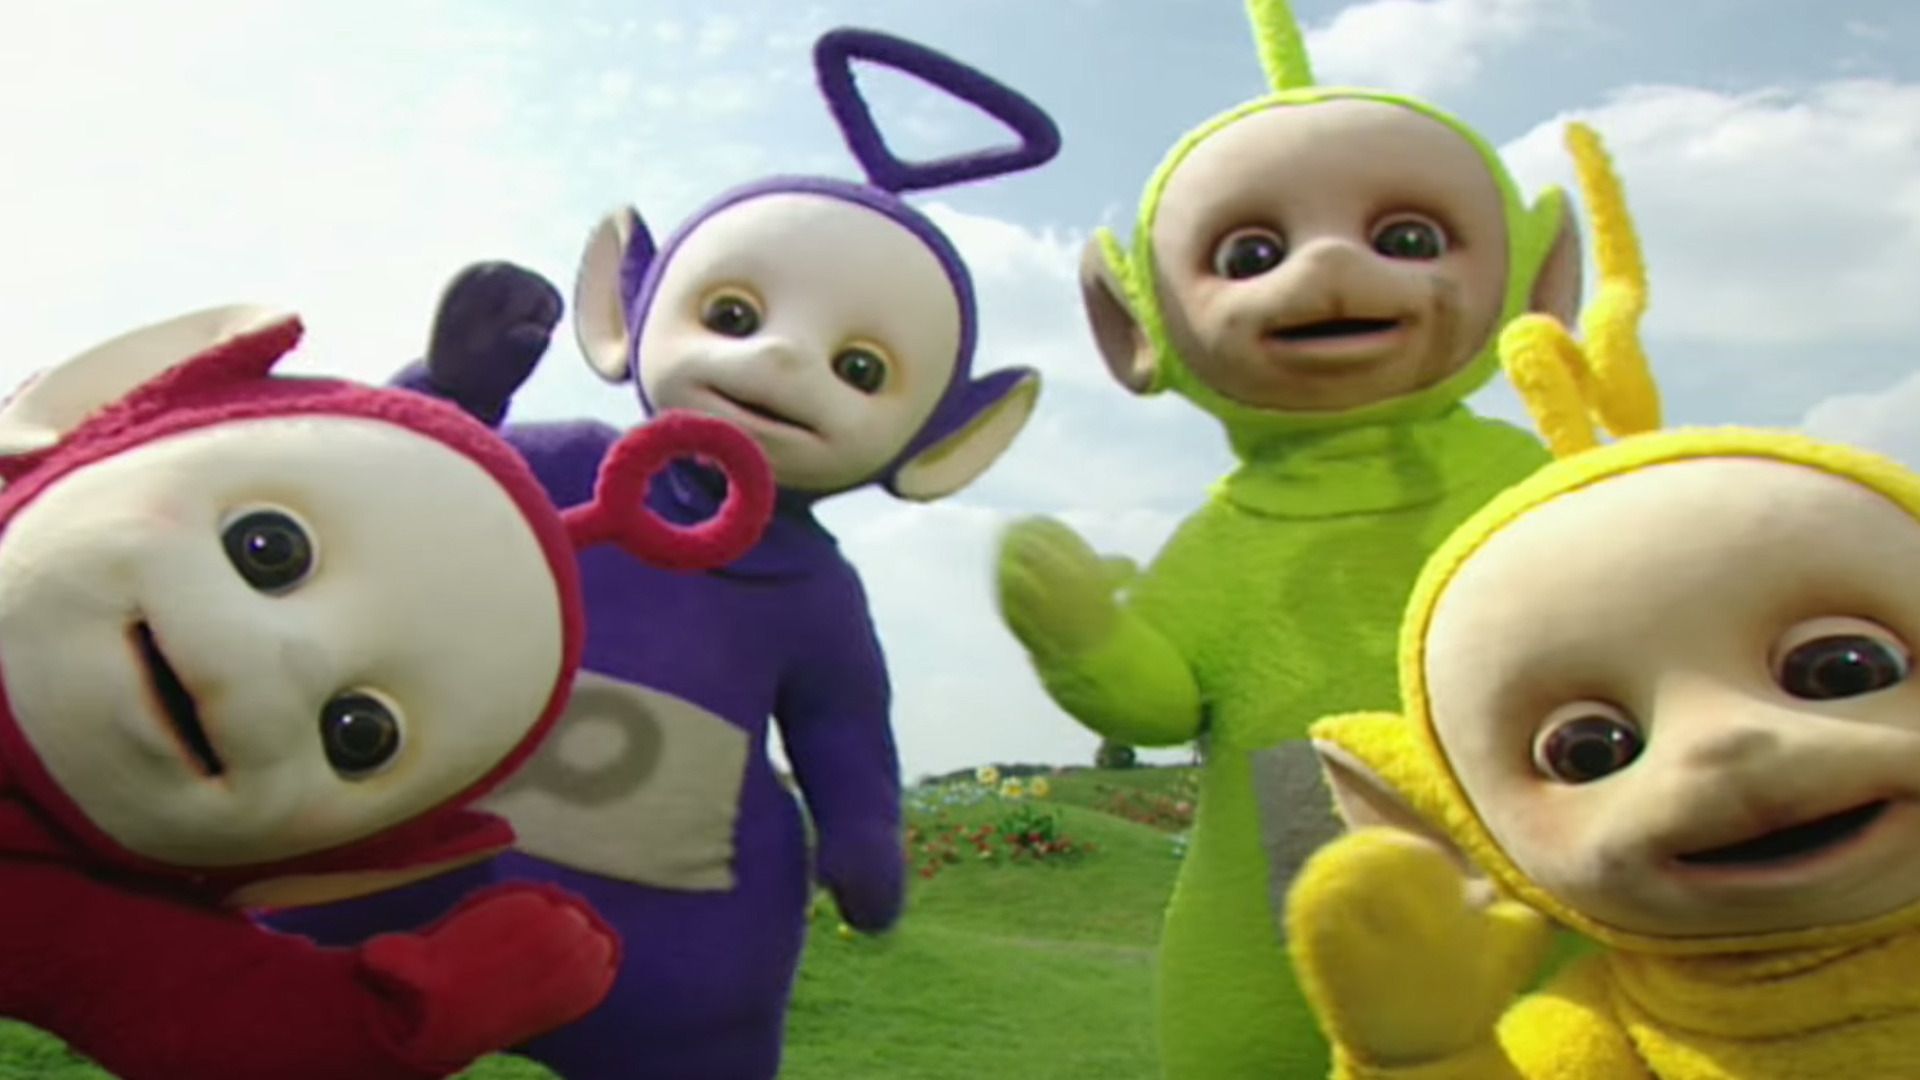 Man in Teletubby costume breaks into home, stea... | the popurls ...